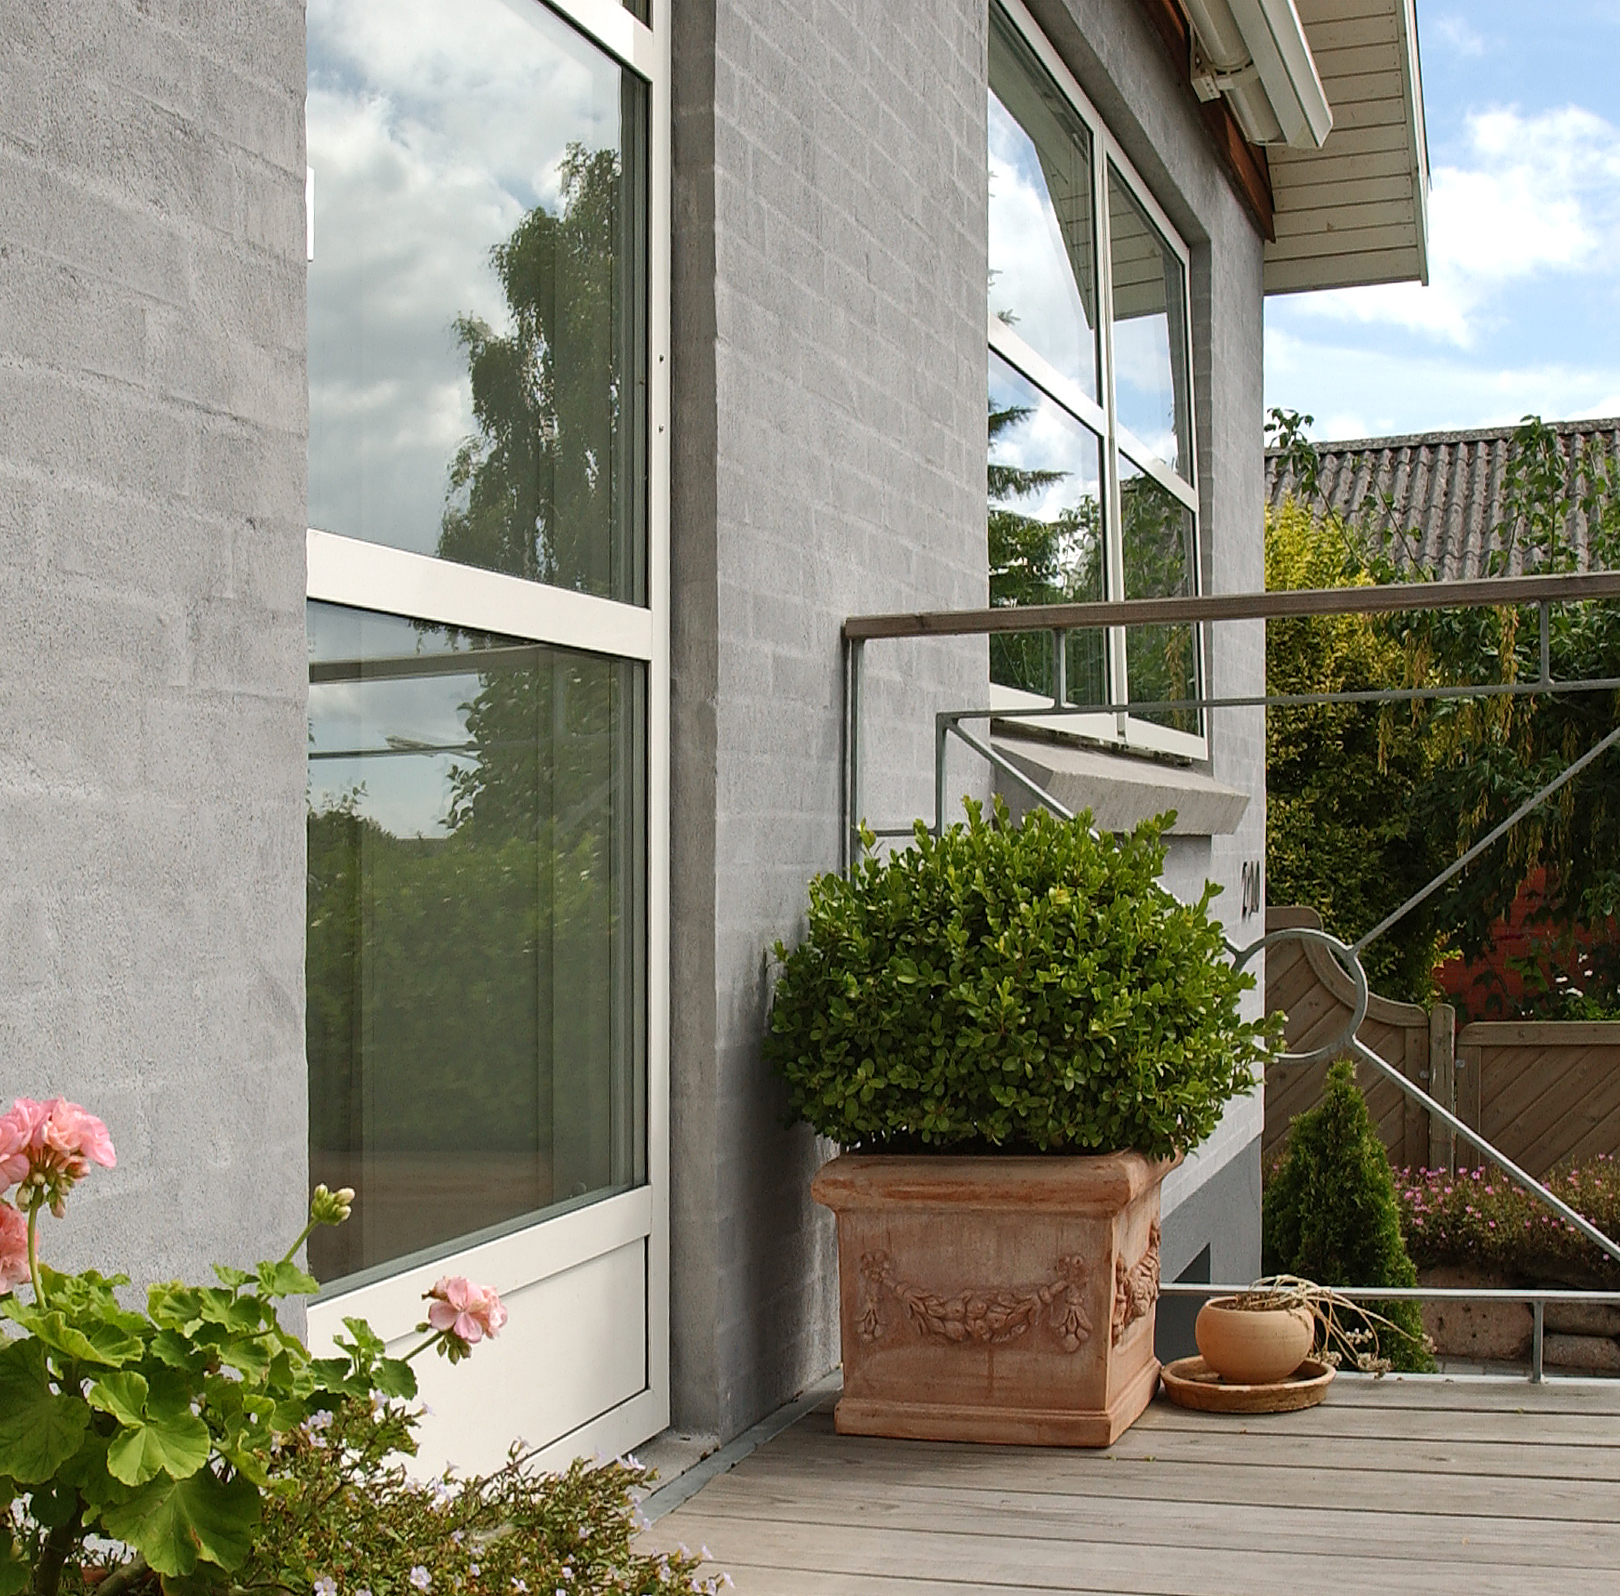 velfac 200 windows with decking outside and potted plant